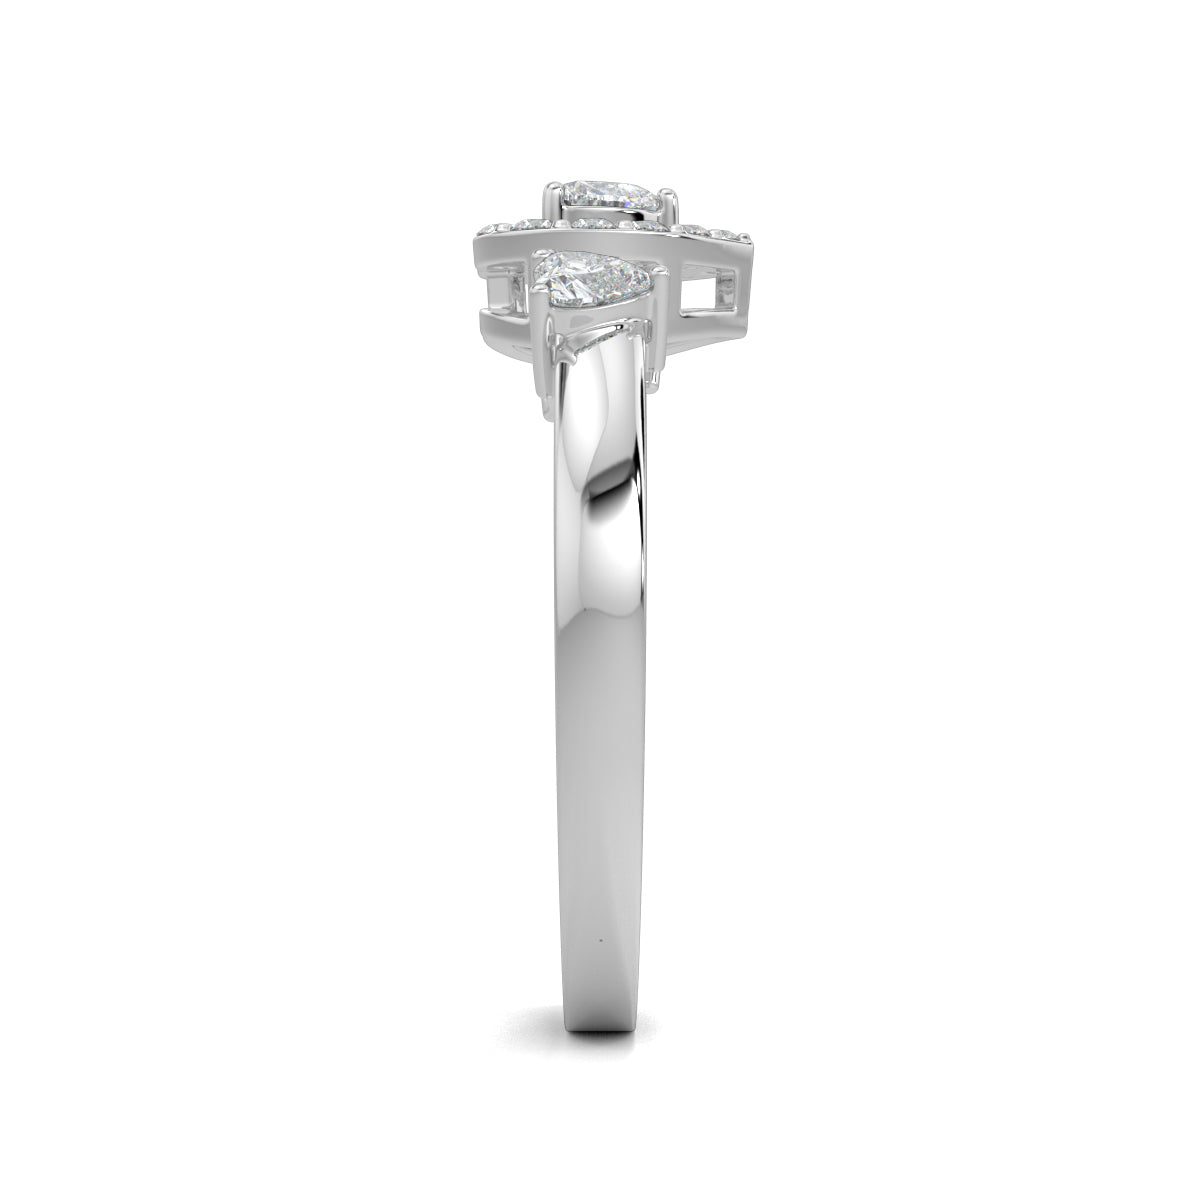 White Gold, Diamond Ring, Romantic heart solitaire ring, natural diamond ring, lab-grown diamond ring, heart-shaped diamond, halo setting, sustainable jewelry, love diamond accents, ethically sourced diamonds